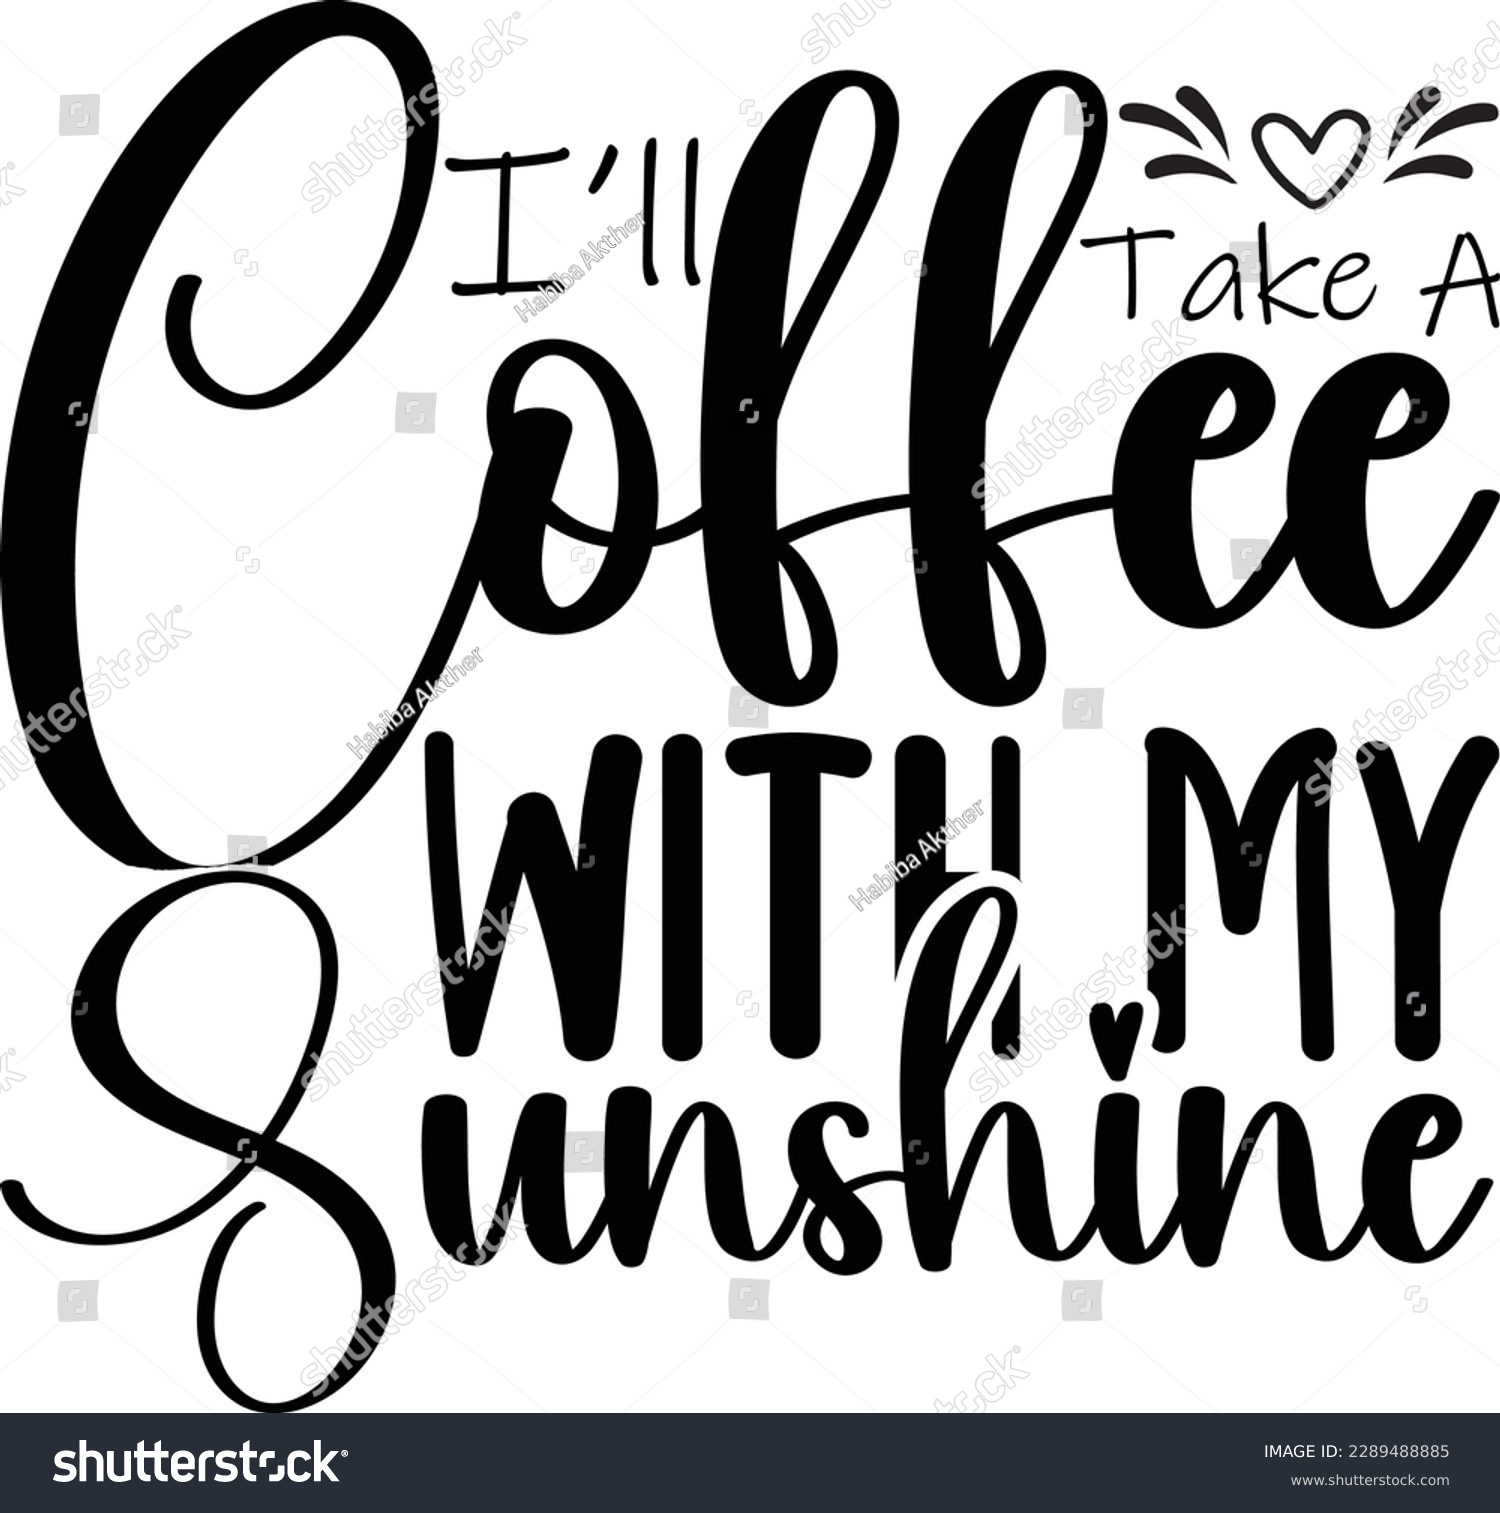 SVG of Retro Coffee SVG Bundle,Coffee SVG Bundle,Funny Coffee SVG,Caffeine Queen,Coffee Lovers,Coffee Obsessed,Coffee mug,silhouette,Jesus,Iced coffee,heart steam,Aesthetic svg,Hippie svg, svg